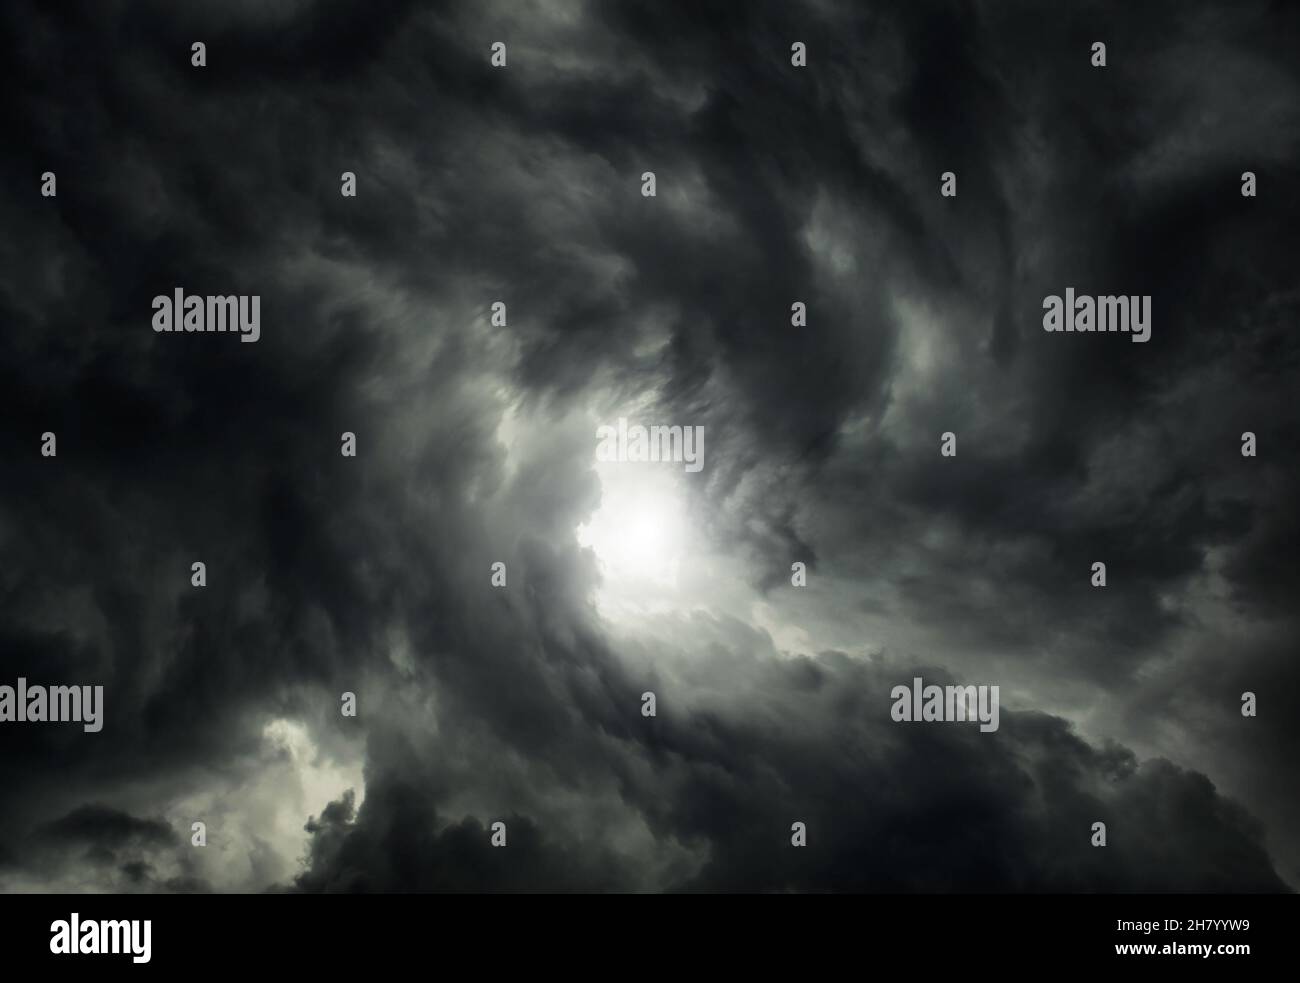 White Hole in the Whirlwind of the Dark Storm Clouds Stock Photo